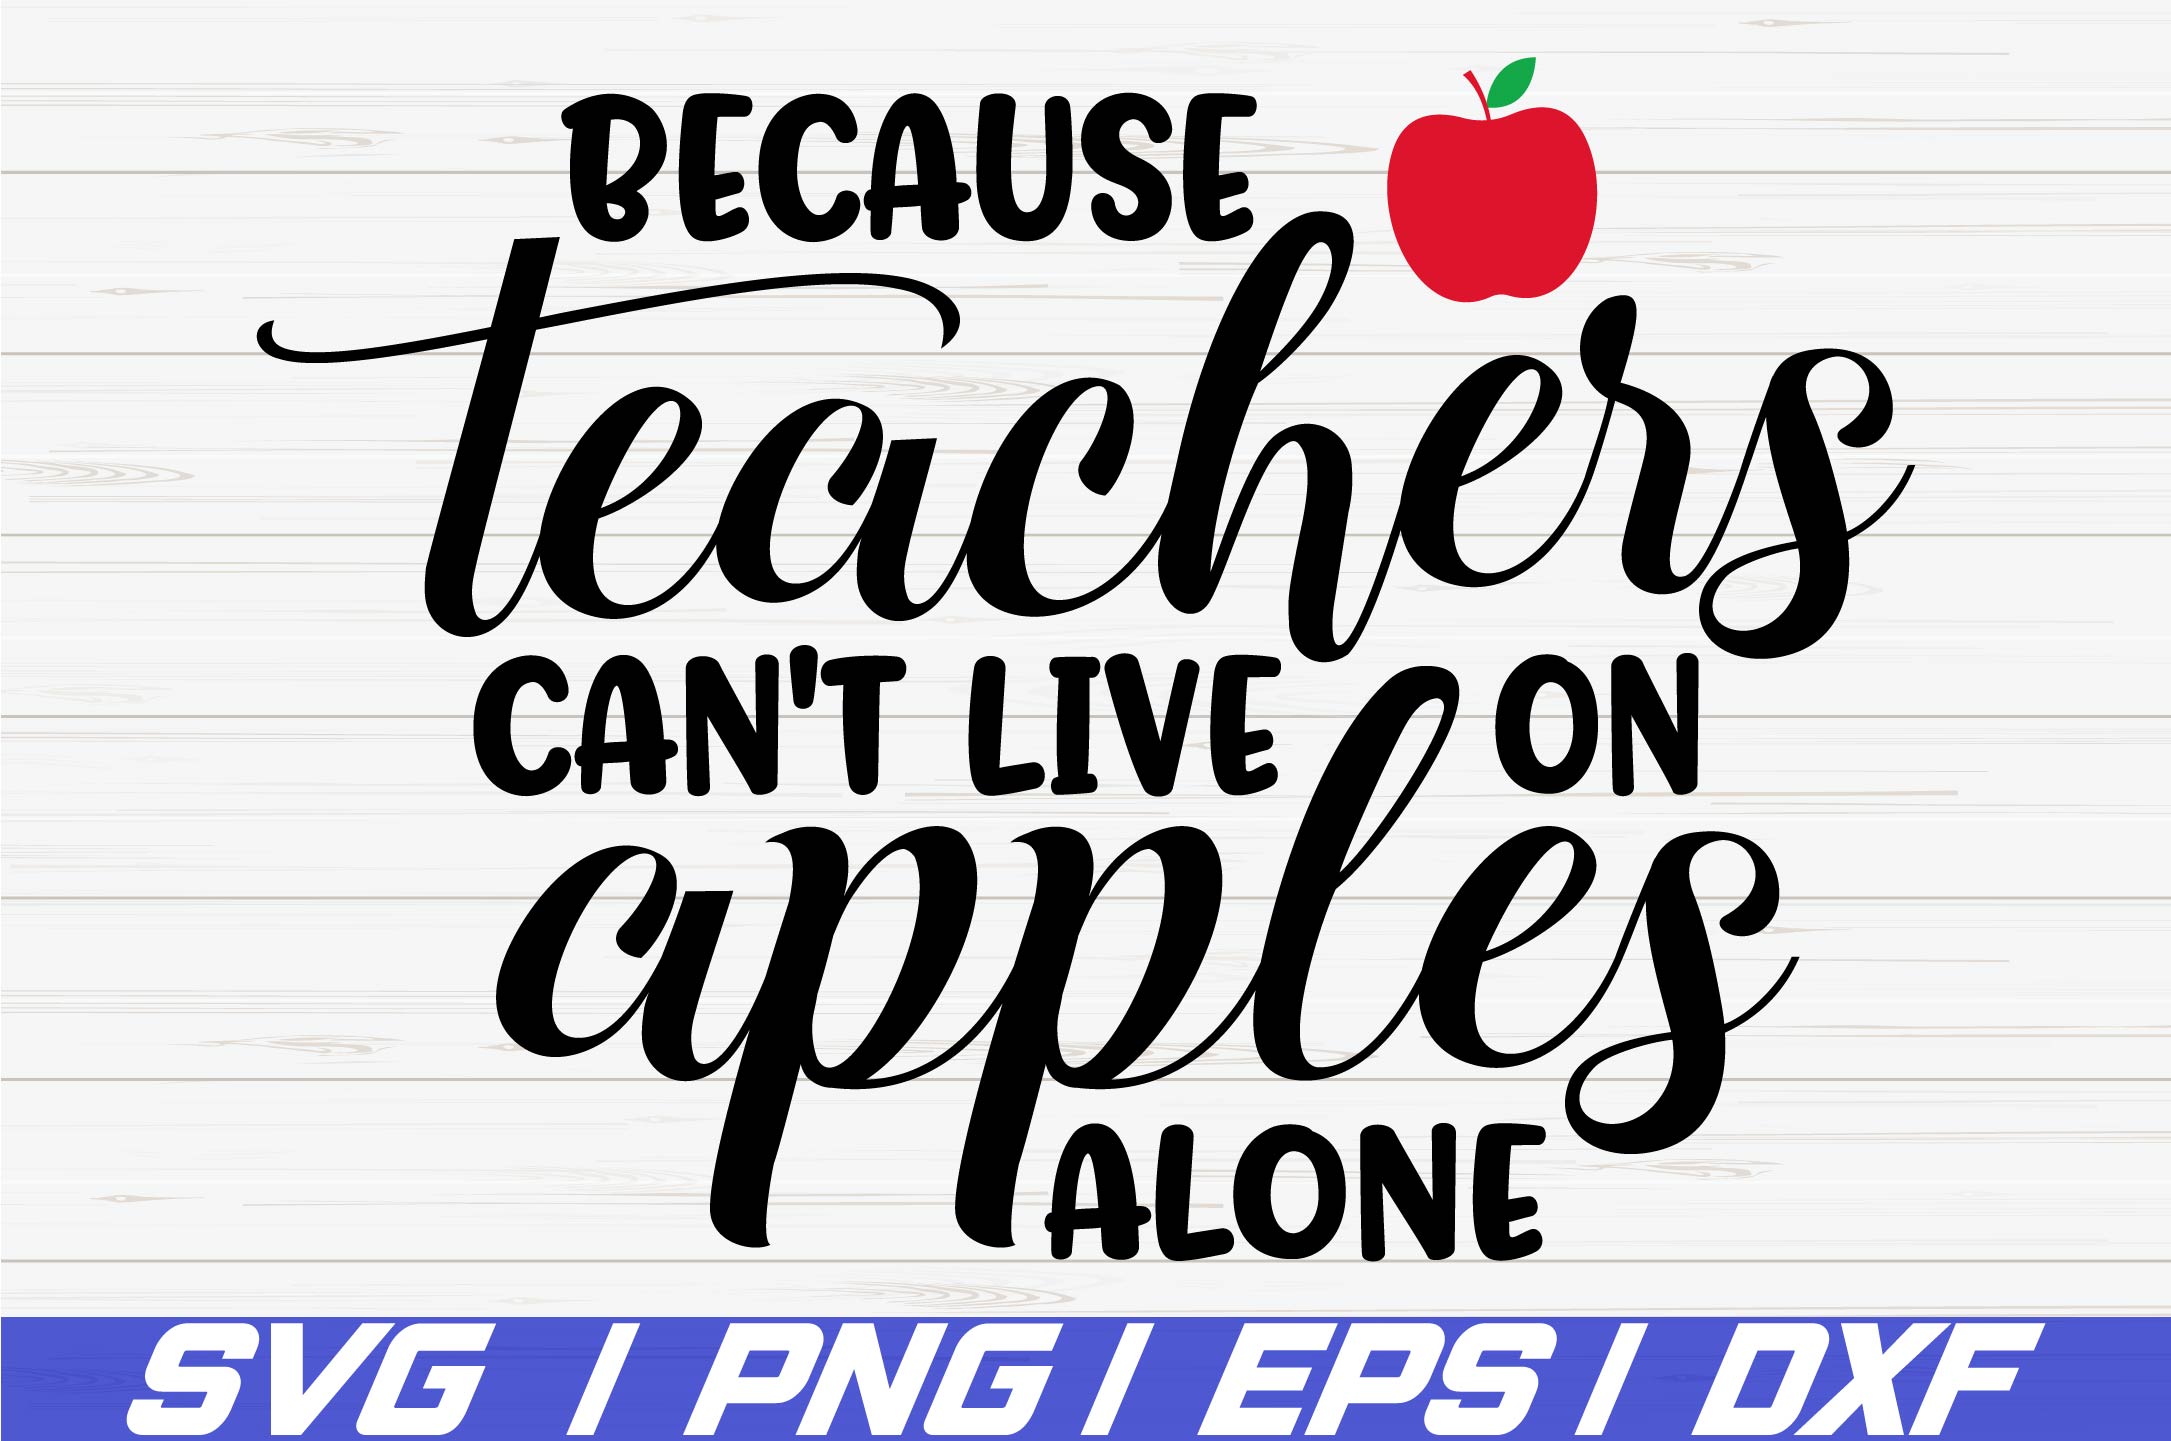 Because Teachers Can't live On Apples Alone SVG / Cut file